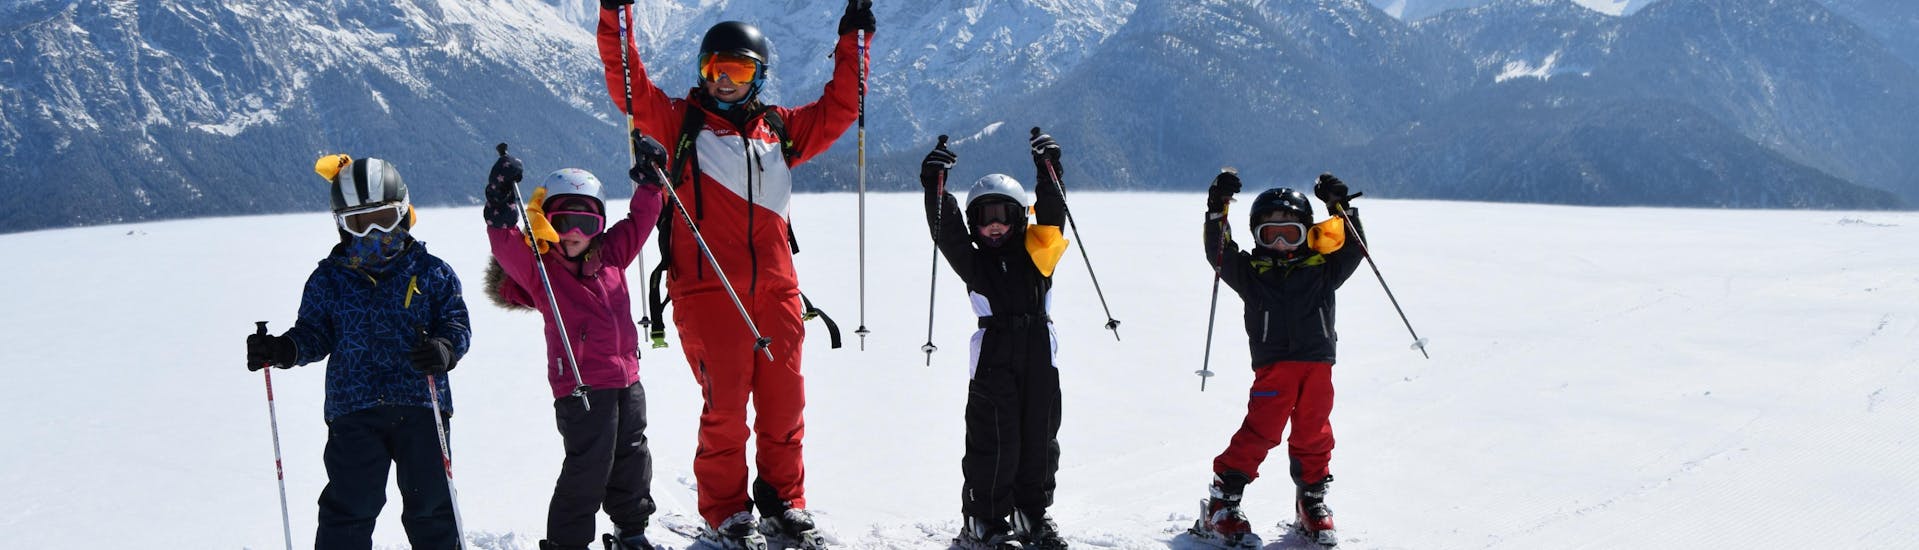 Kids waving at the camera during the Kids Ski Lessons (4-11 y.) for Advanced Skiers with the HERBST Ski School Lofer.